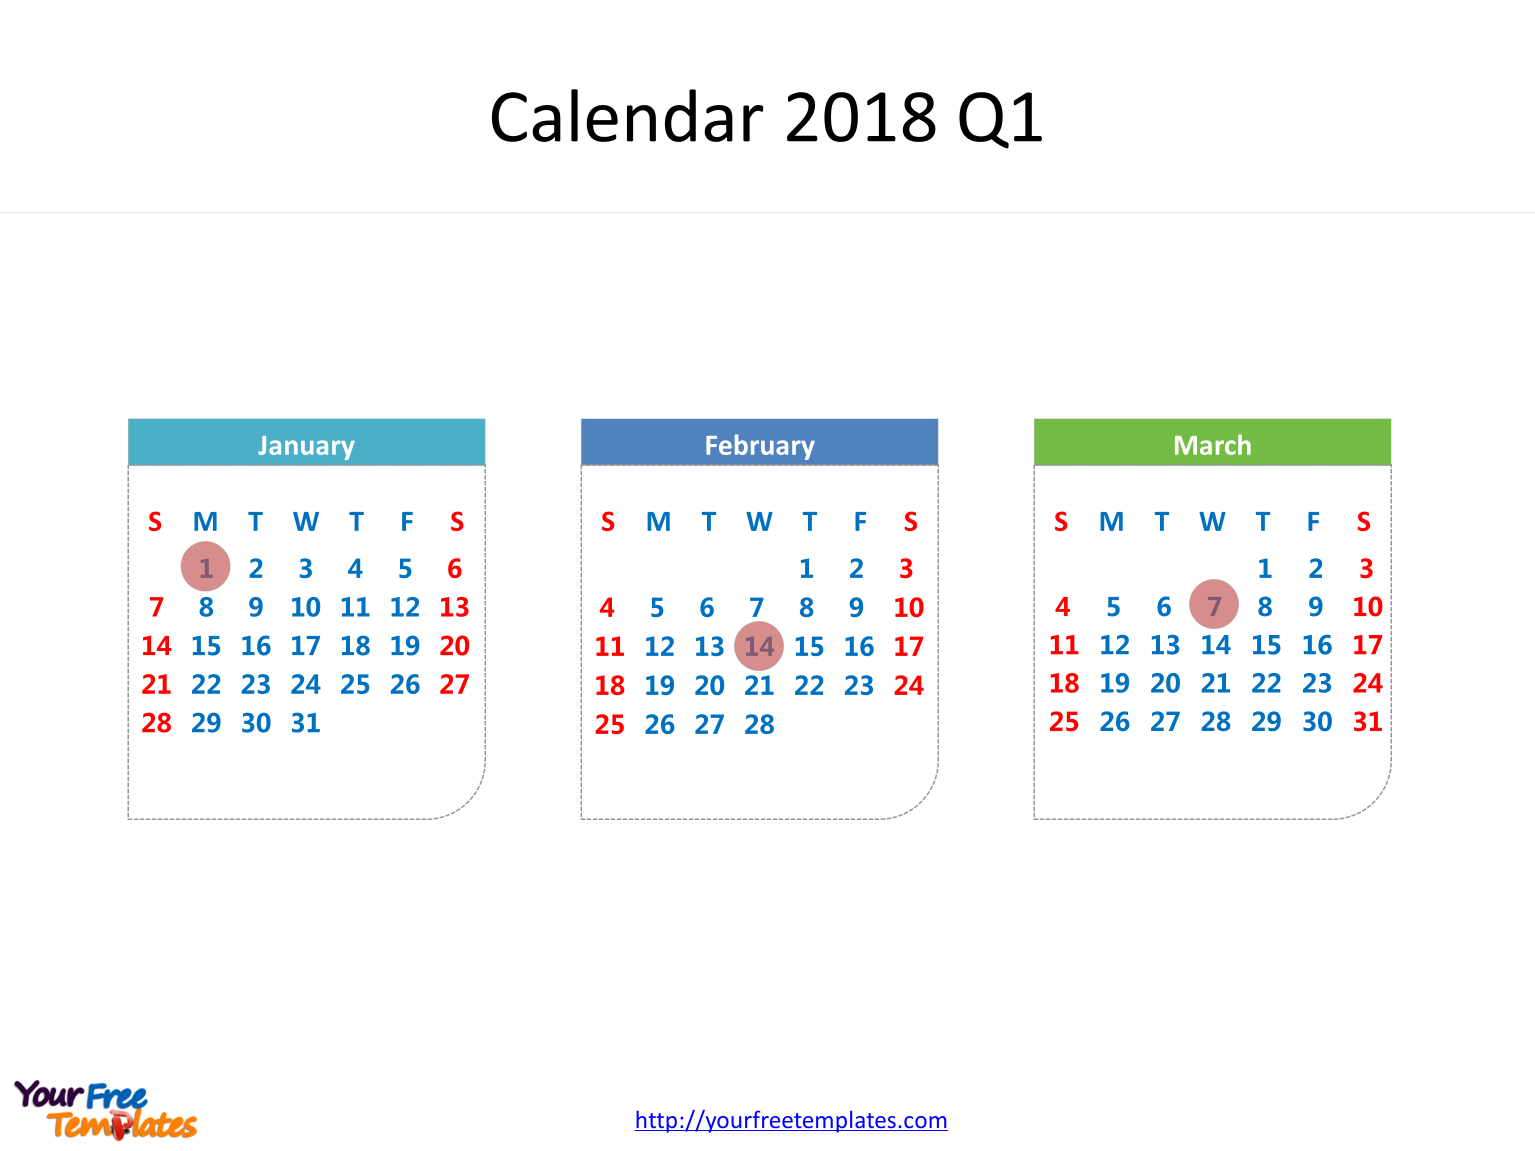 2018 calendar with dates of six months in it